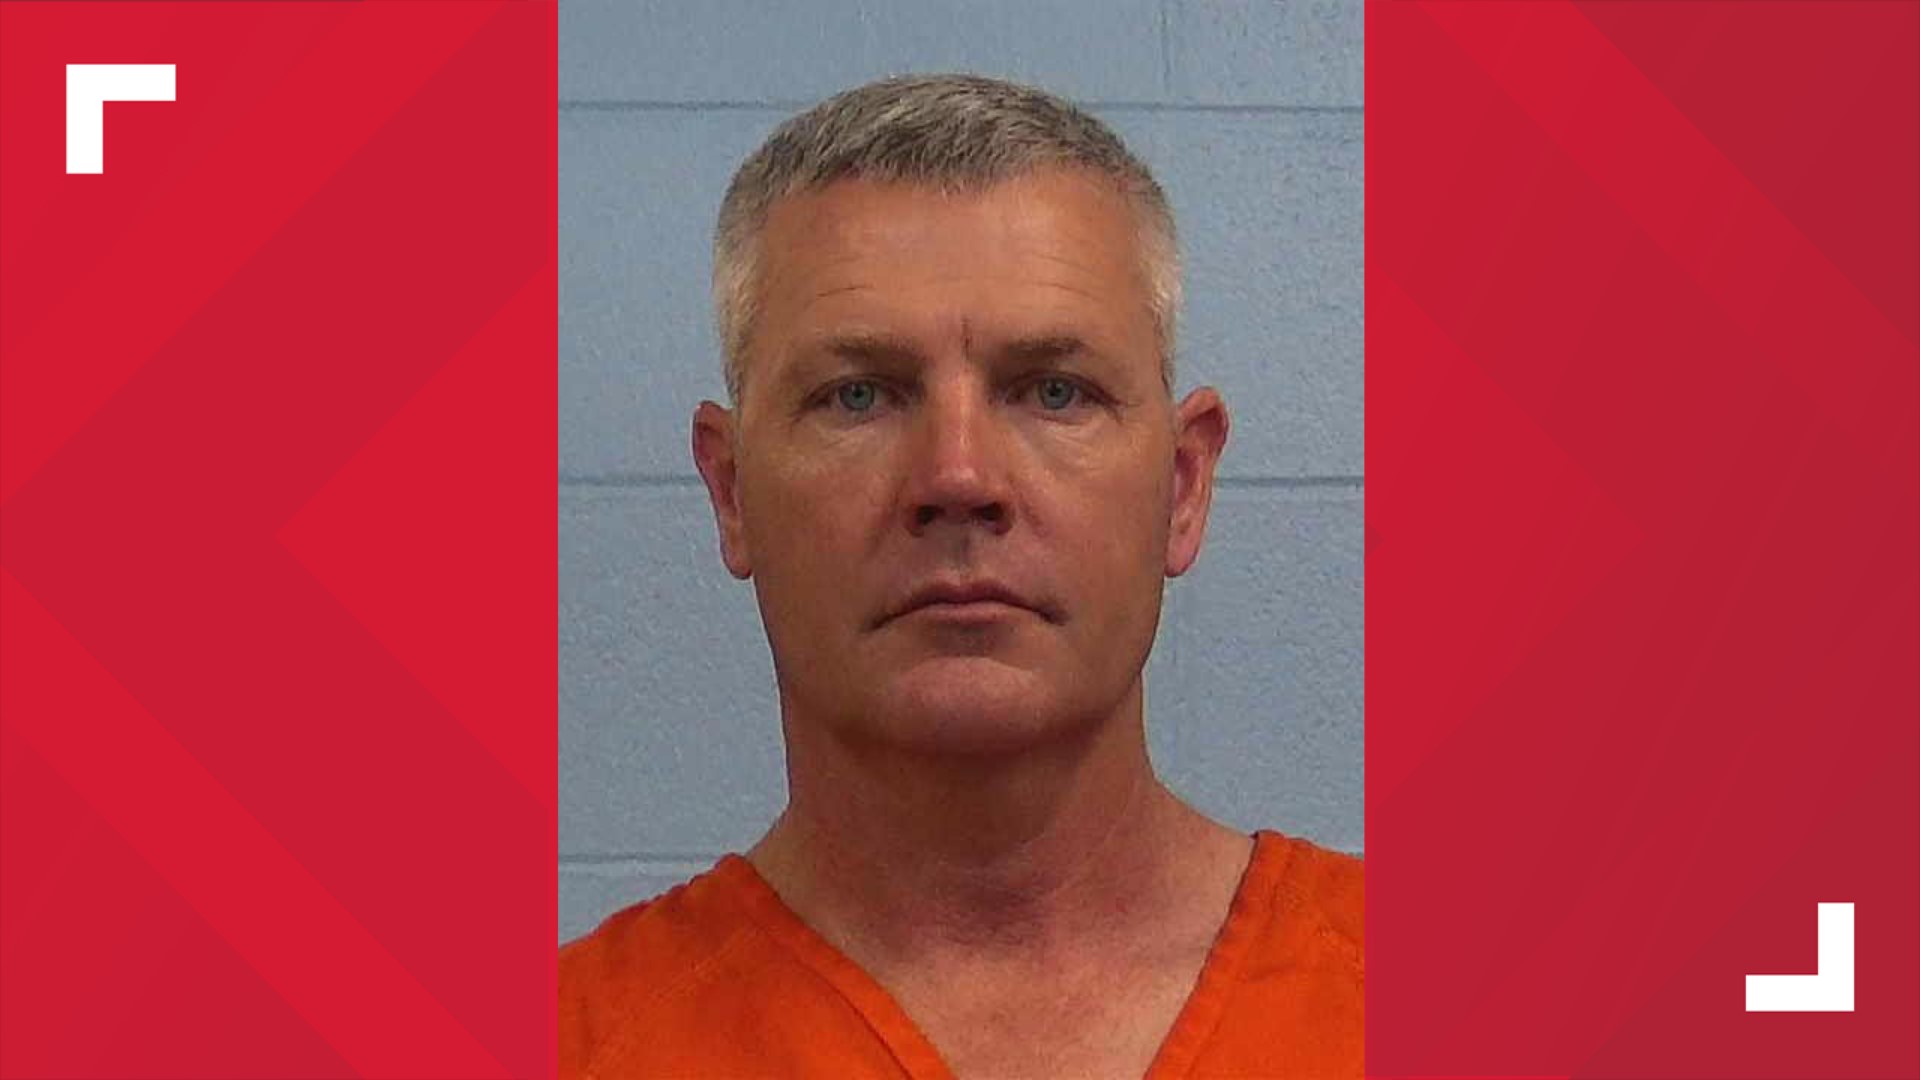 Norman Ashby was indicted on charges of misapplication of fiduciary property and theft of services greater than $300,000, as well as a charge of witness tampering.